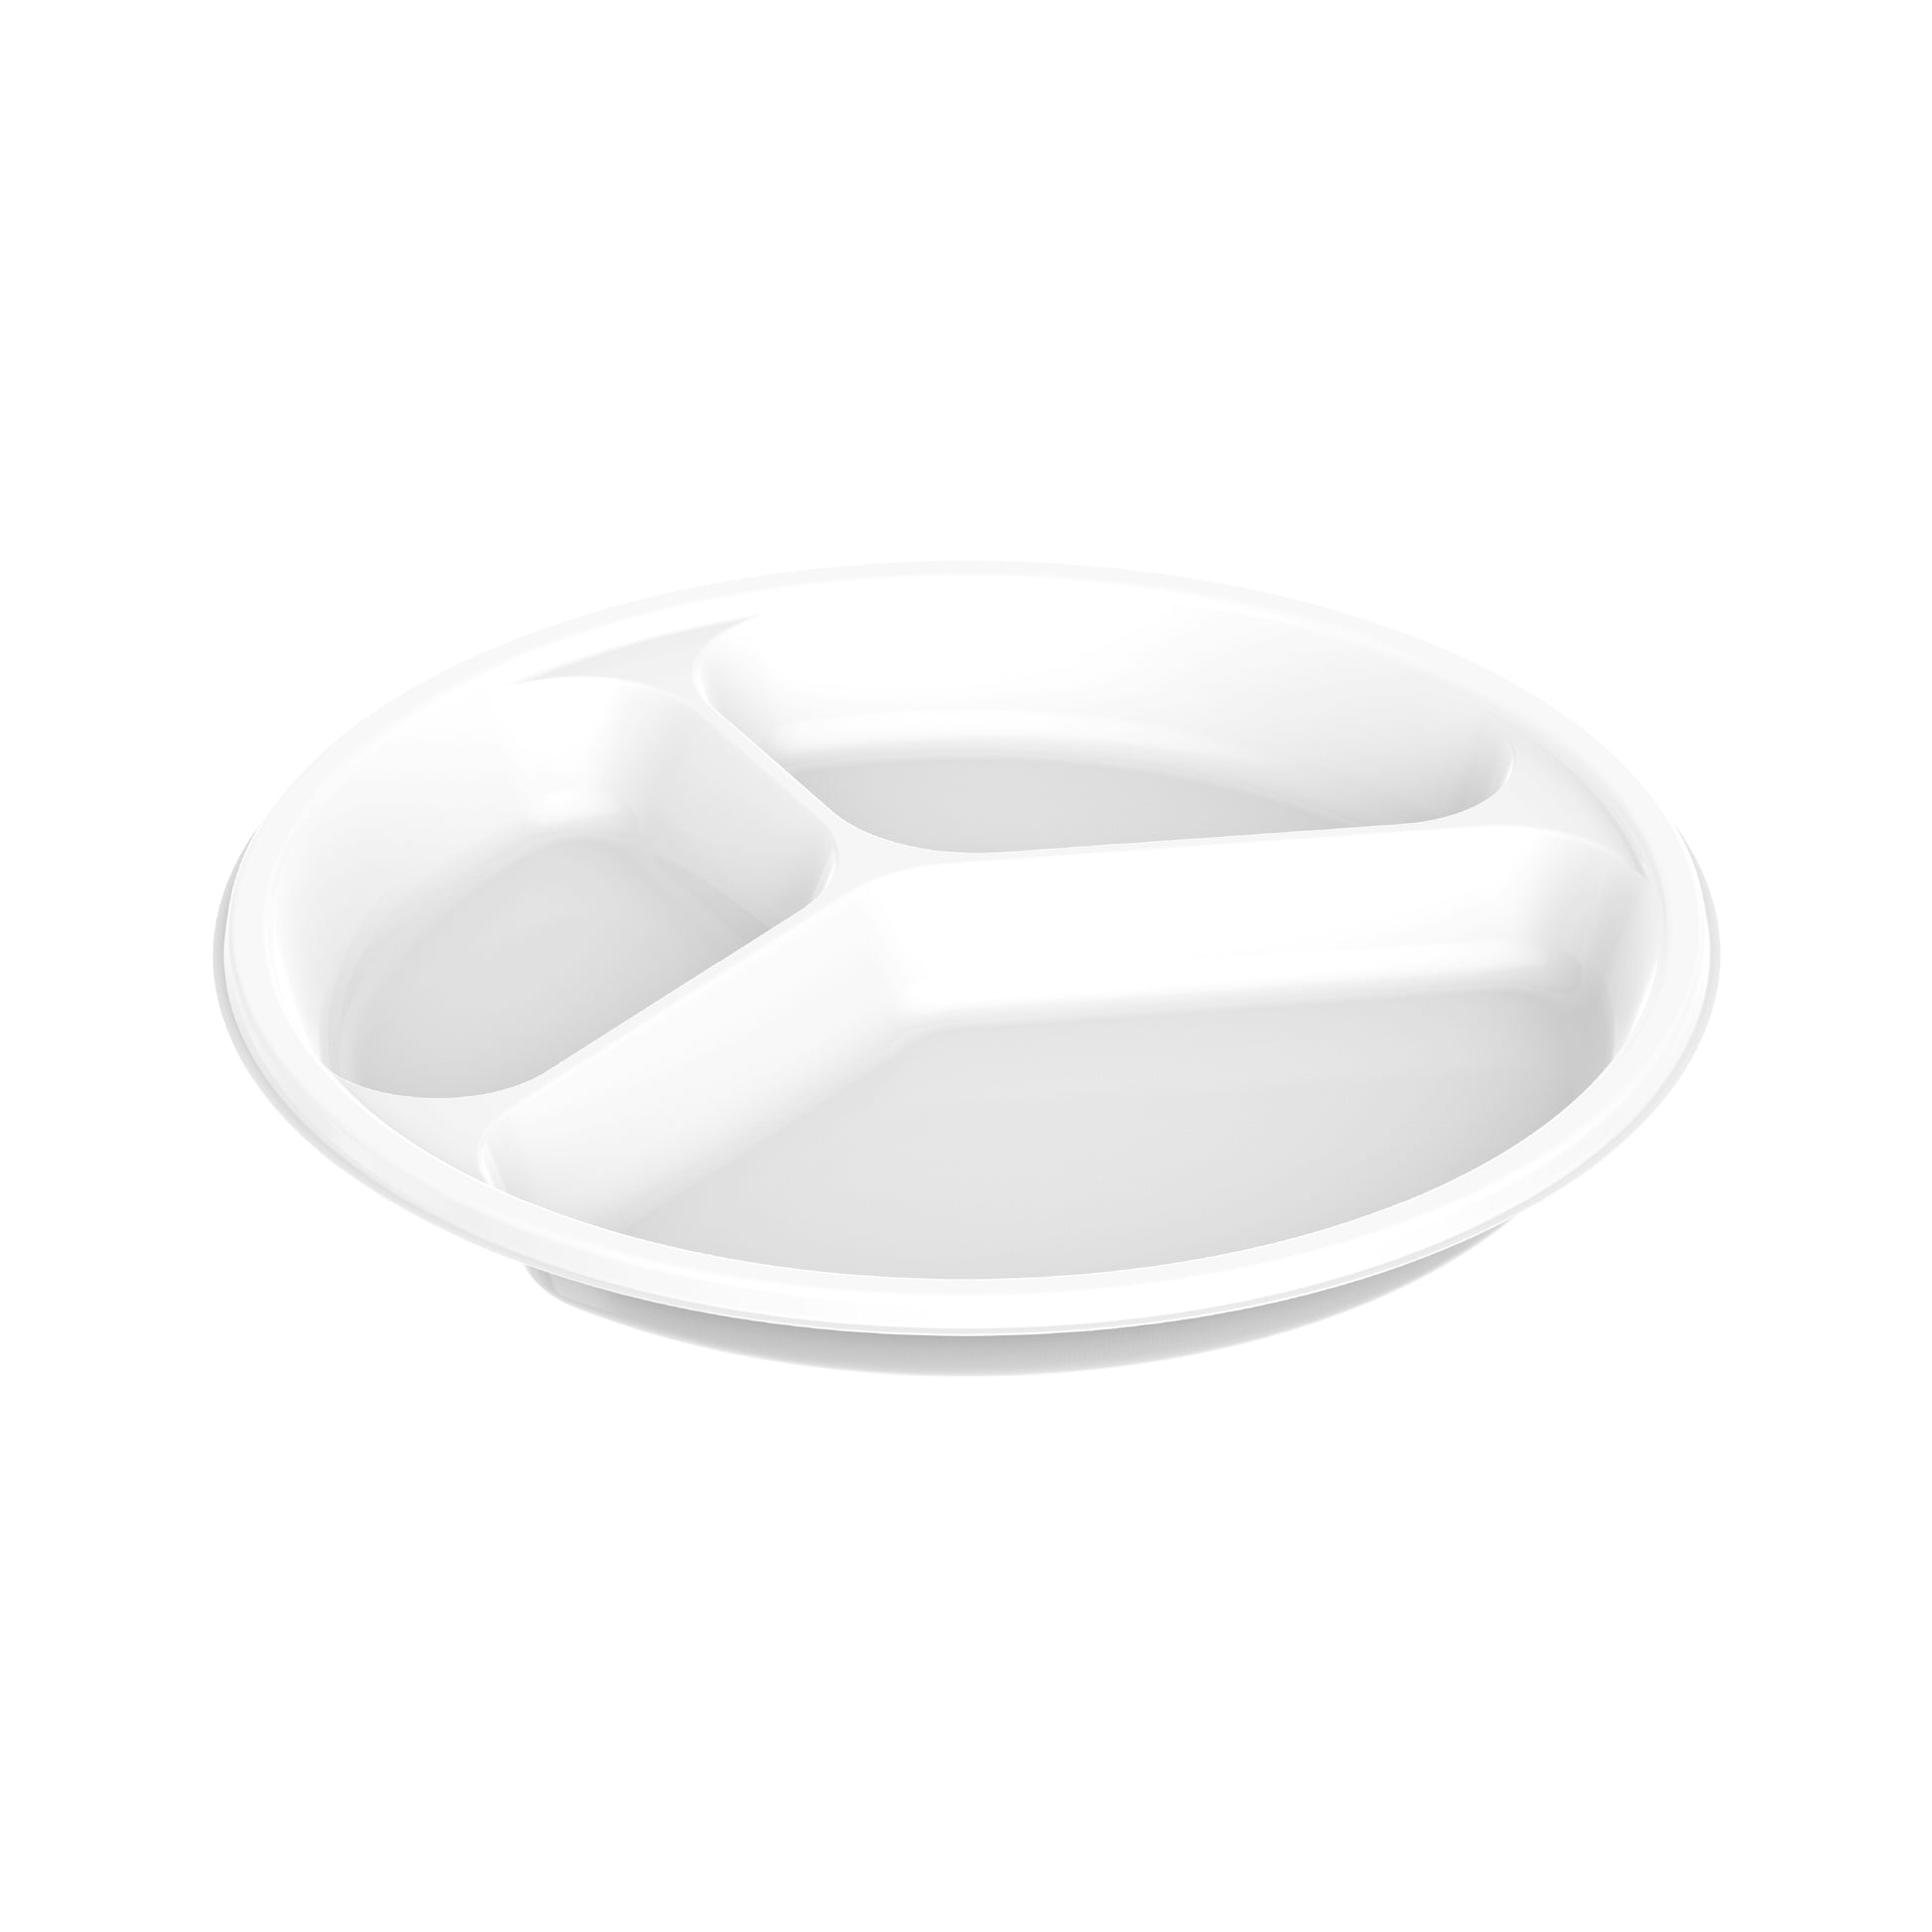 3 Compartments Pack of 25 White 22 cm Plastic Plates